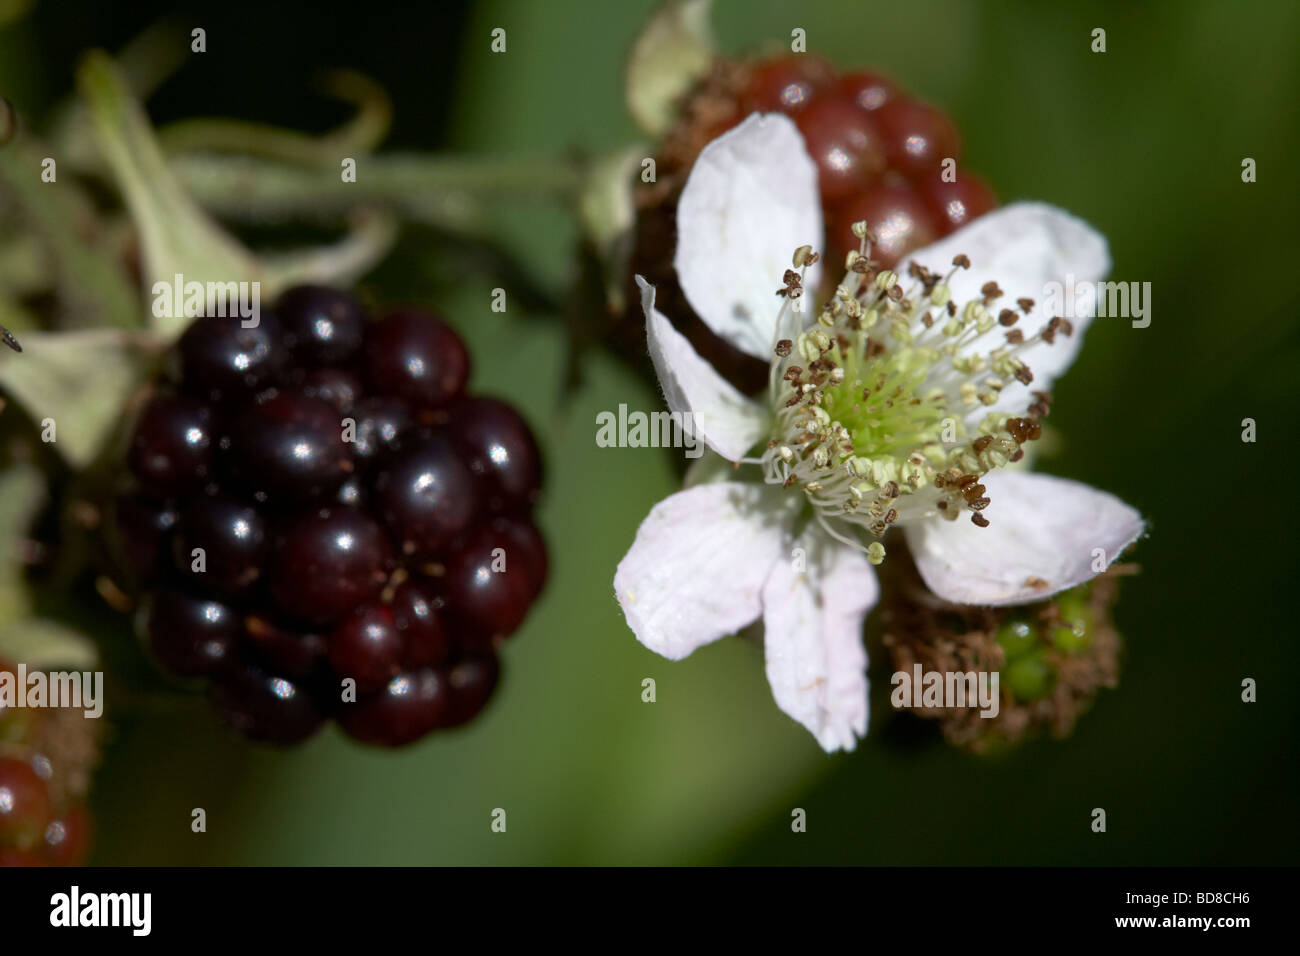 common blackberry rubus fruticosus flower and blackberries growing on a wild bramble bush in a garden in the UK Stock Photo